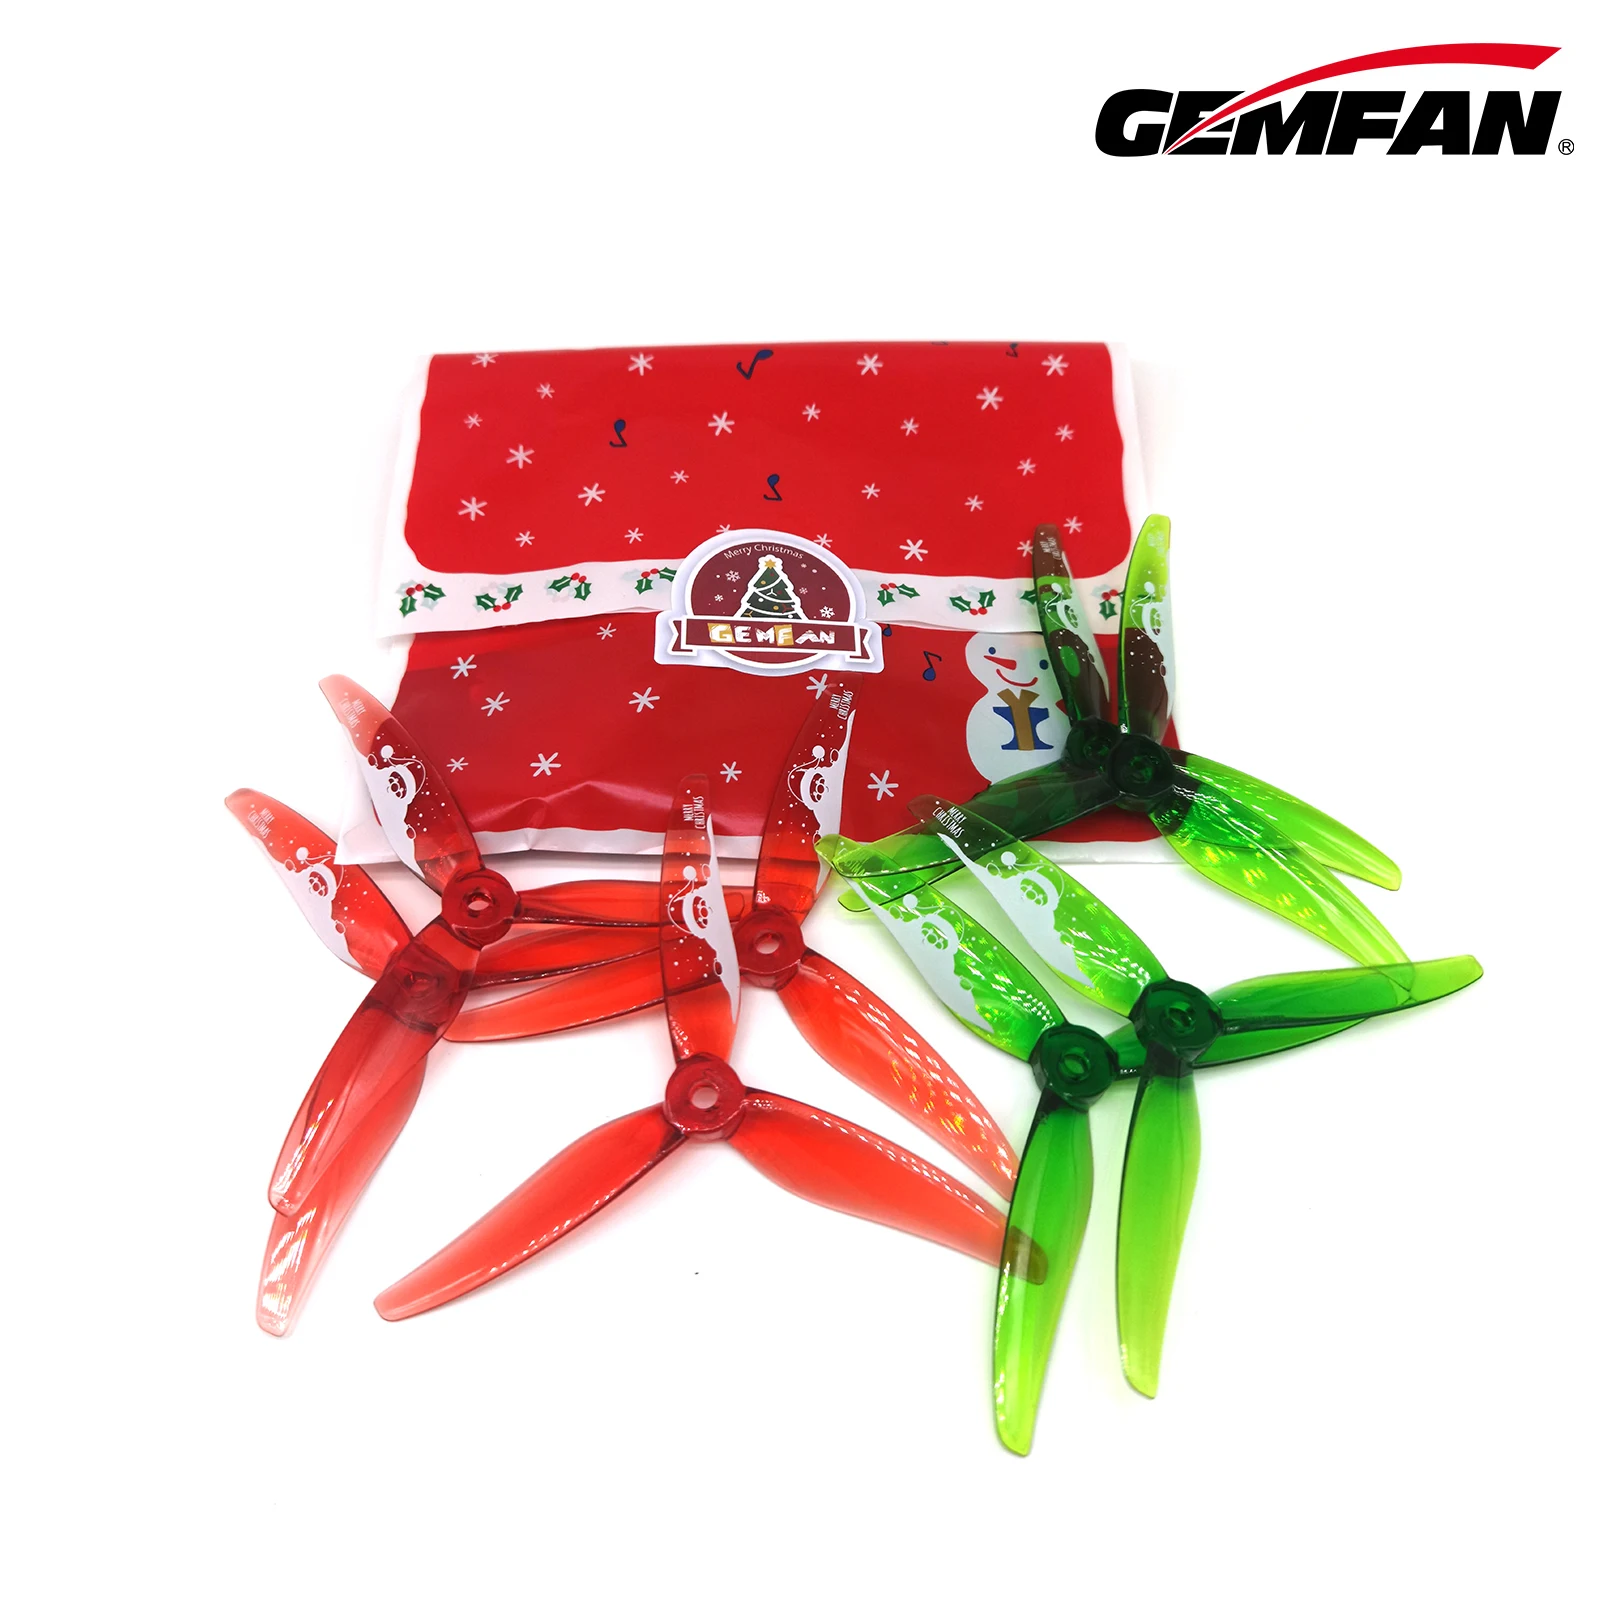 Gemfan Hurricane MCK 51466 V2 + Vannystyle Vanover 5136 Father Christmas Edition props